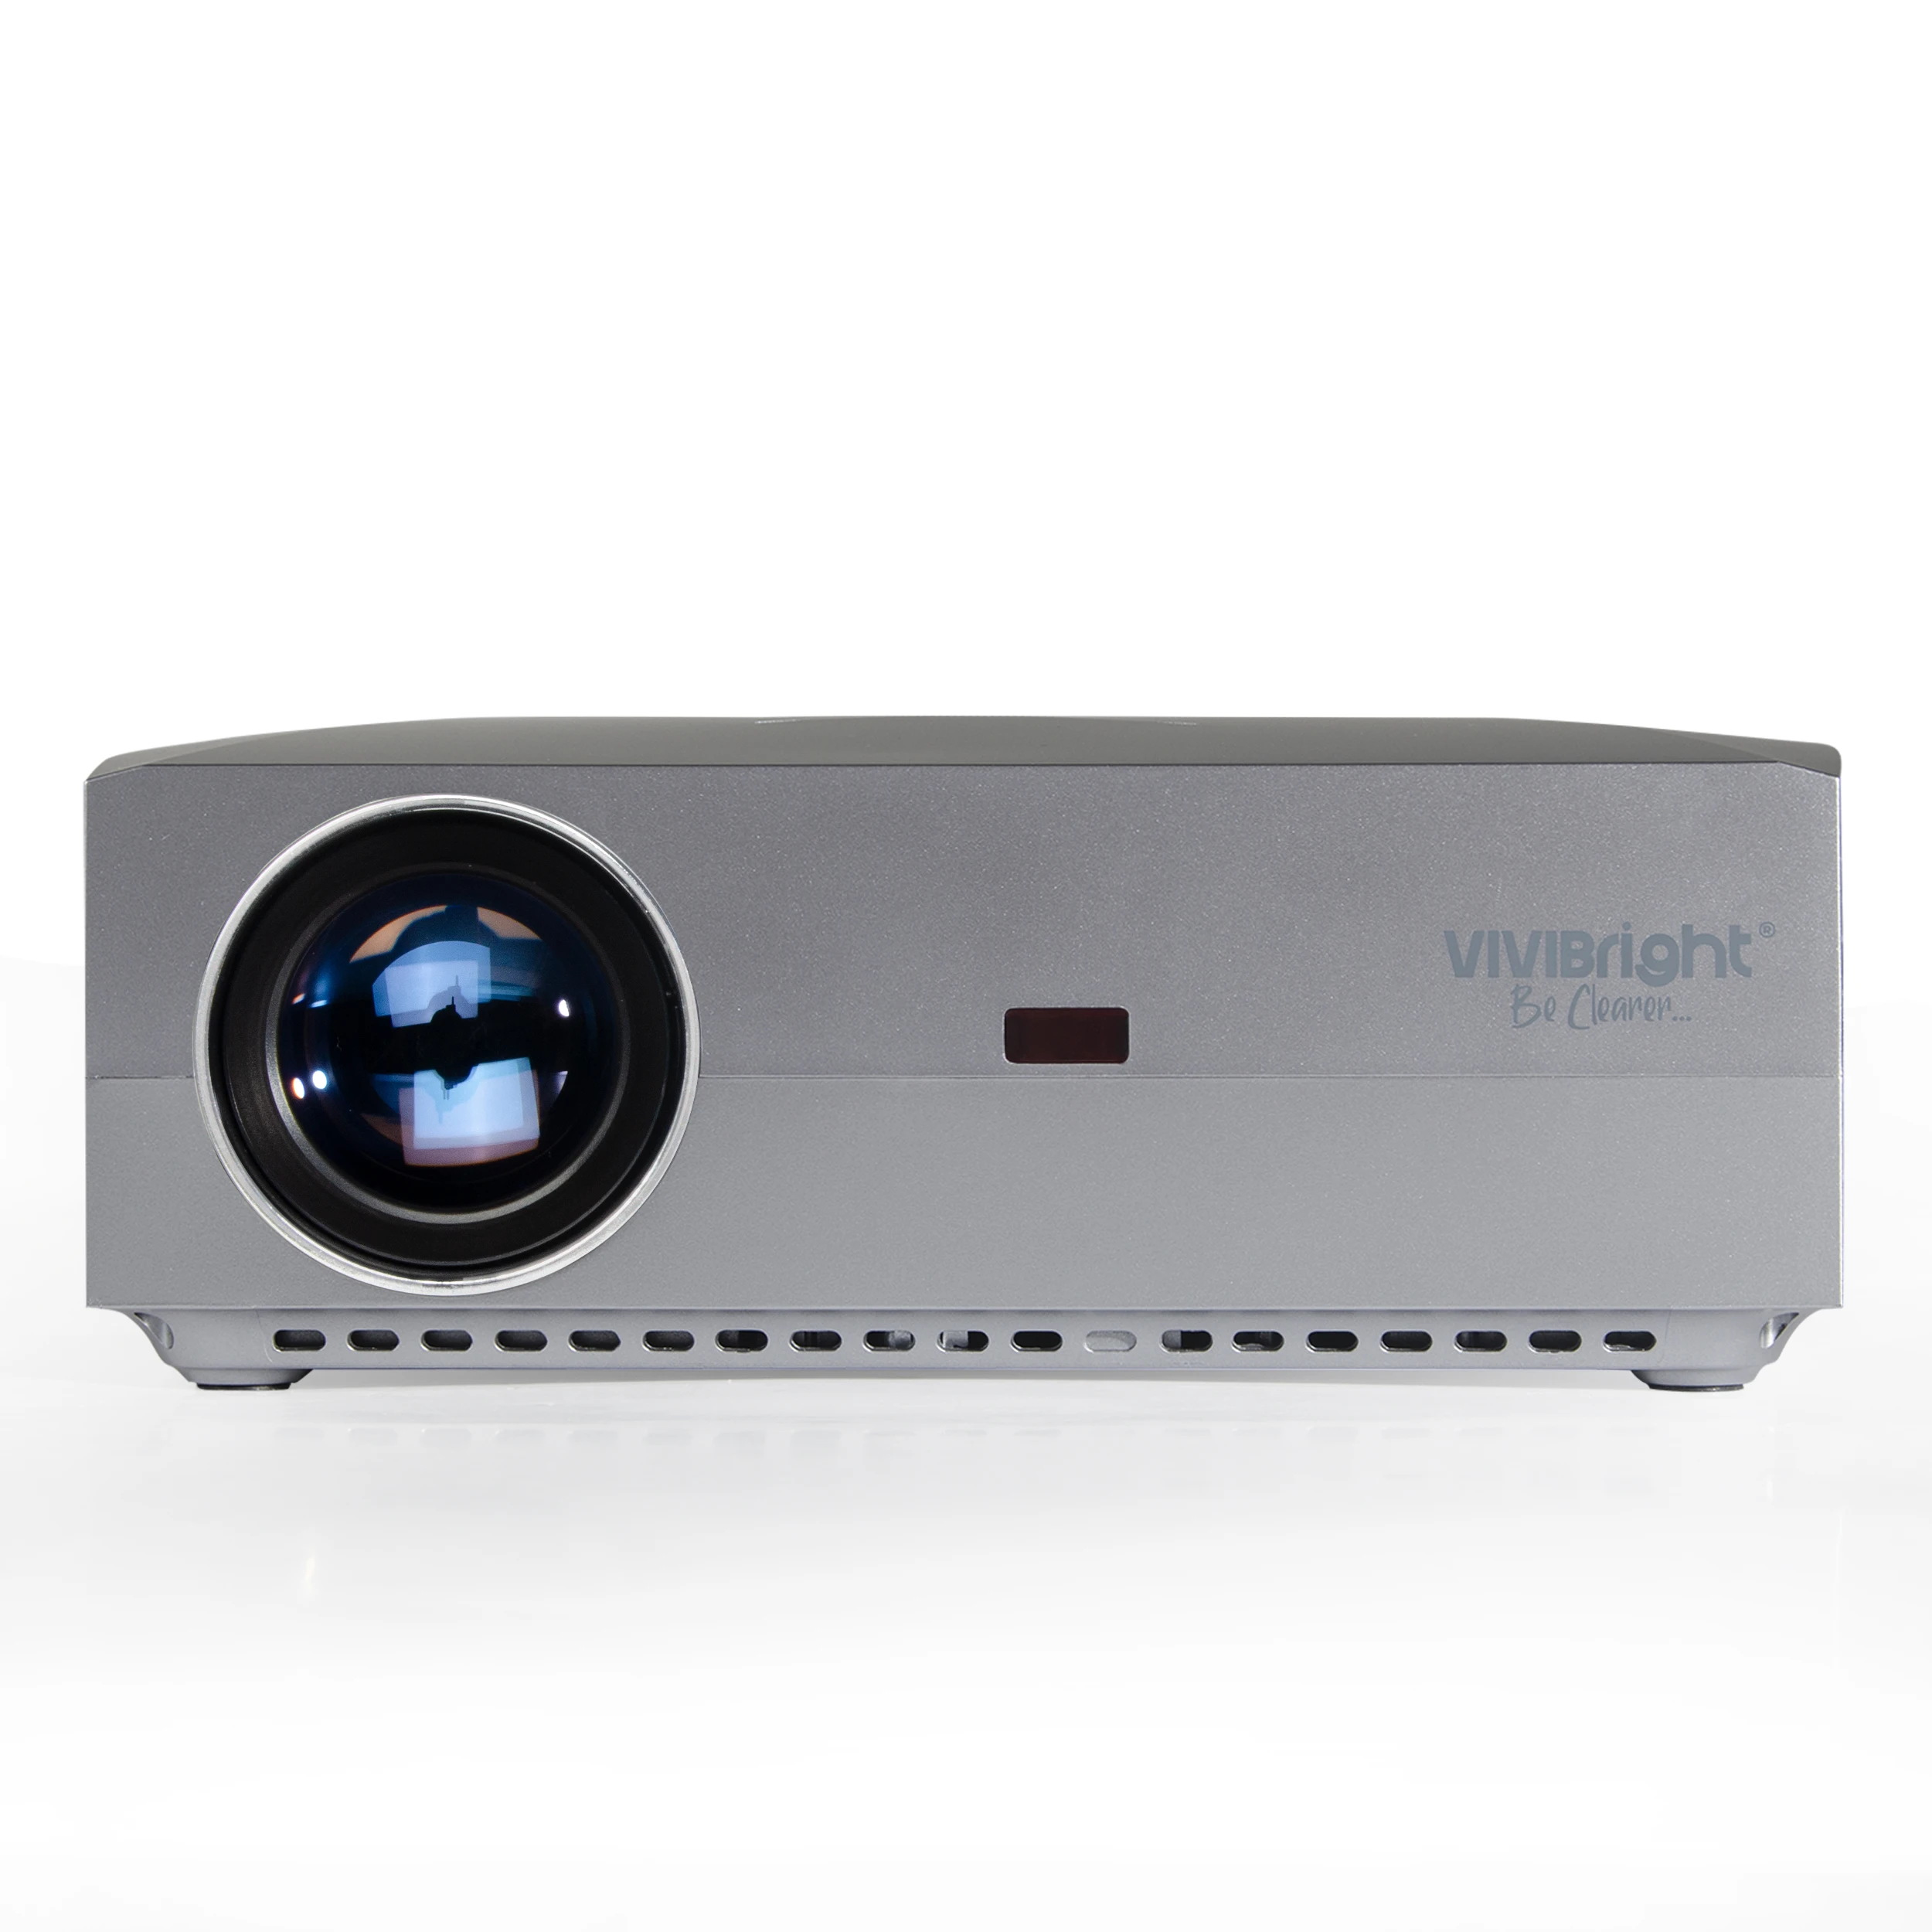 

The Best Portable Projectors for Movies and Sports VIVIBRIGHT F40 Multi-media Projector 1080P Native Support 4K Projector